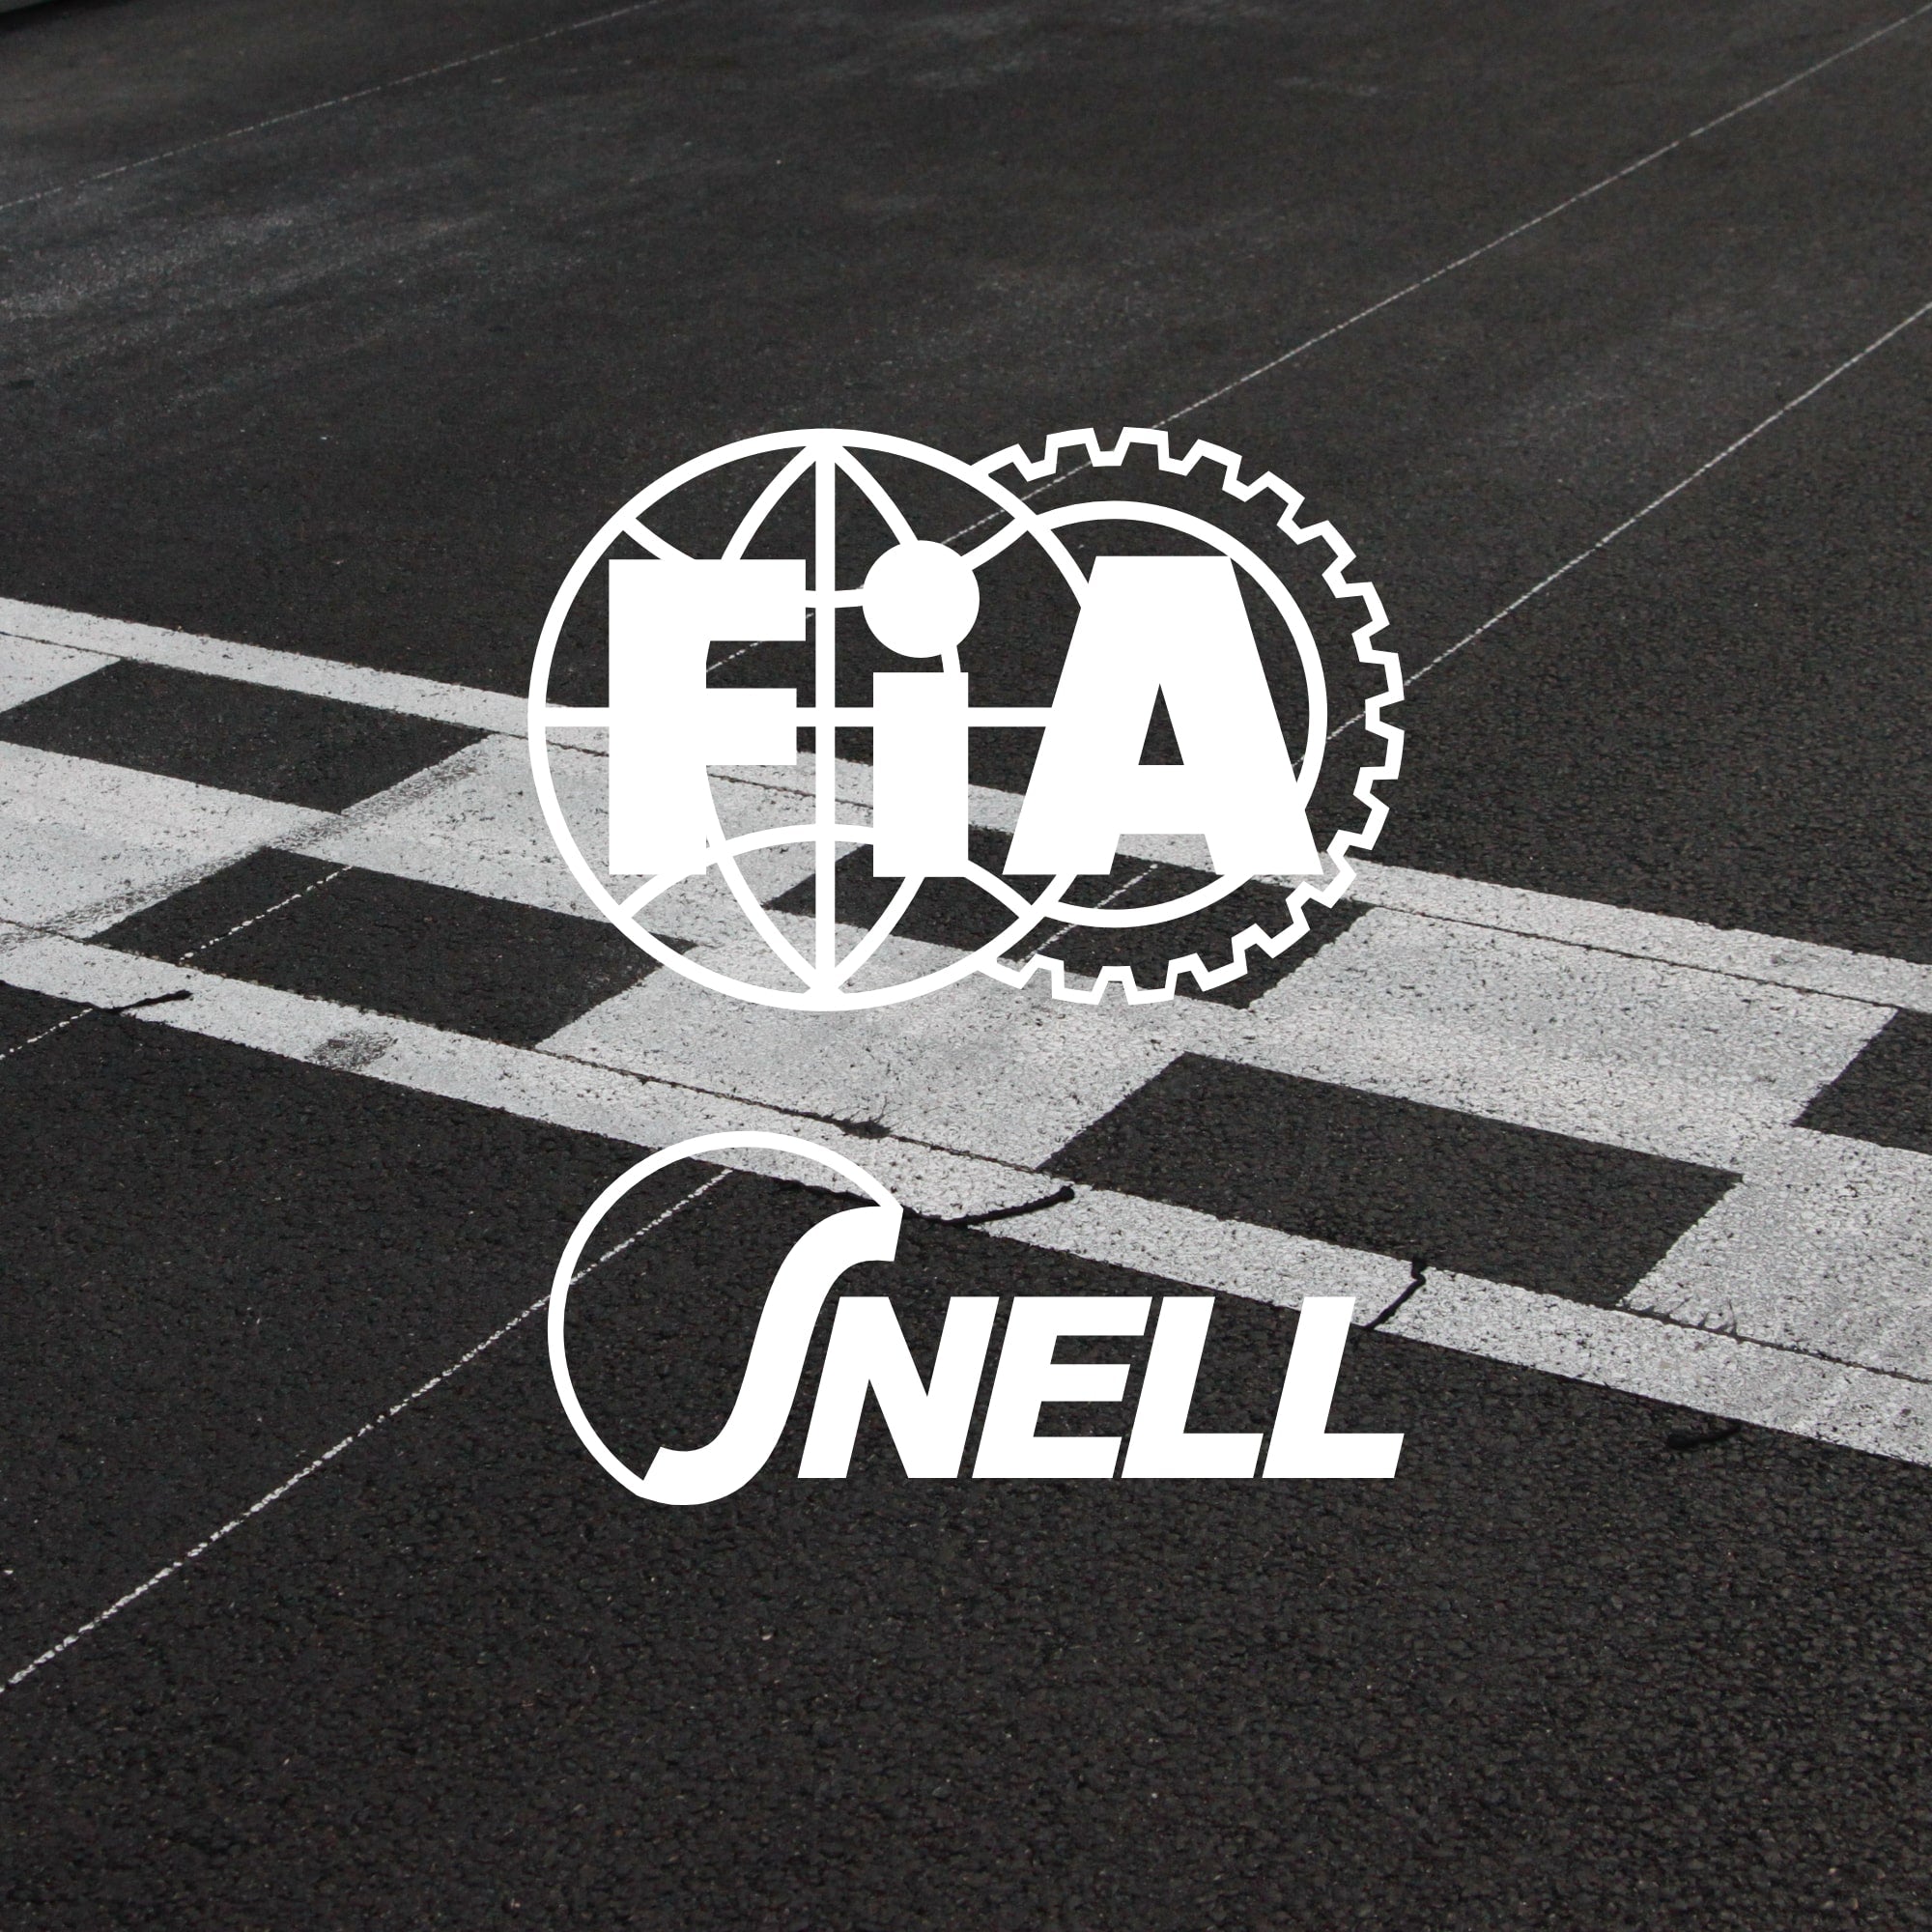 fia and snell certifications